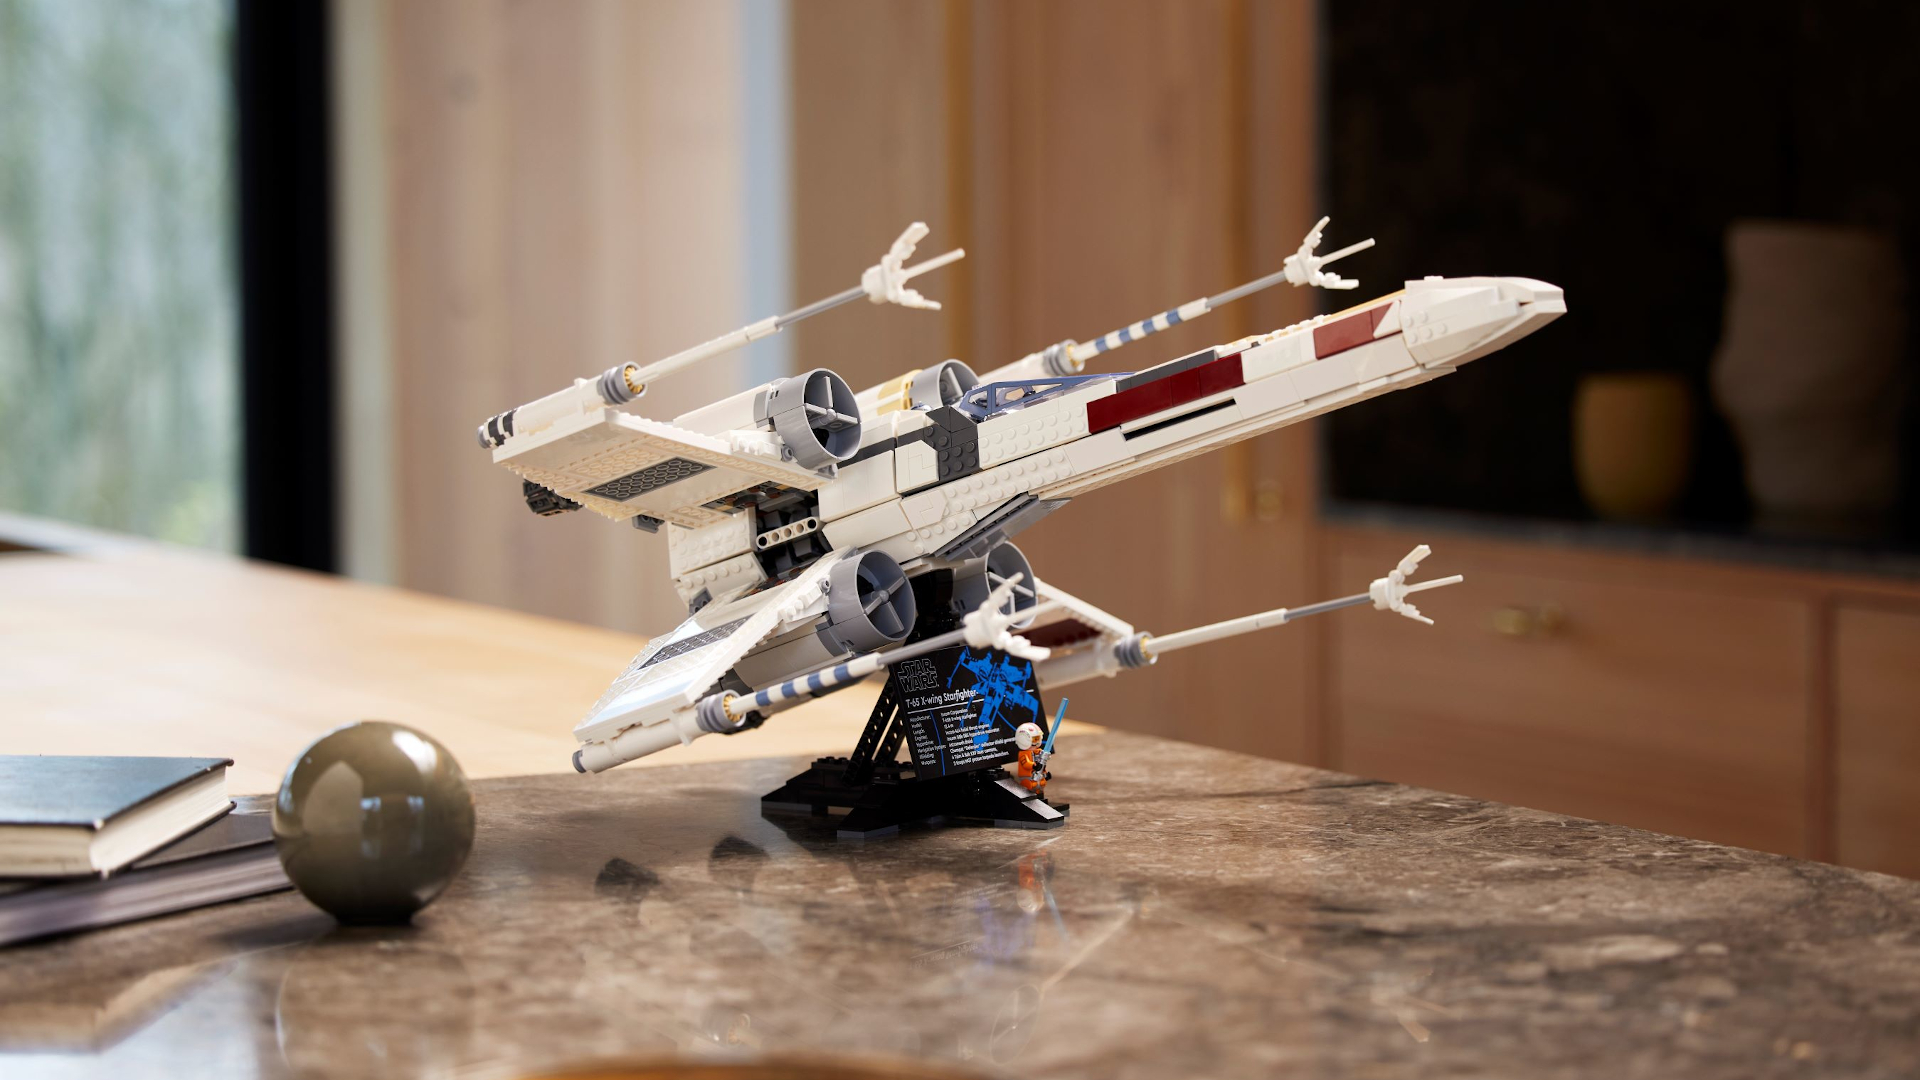 Lego reveals three new Lego Star Wars sets coming in May